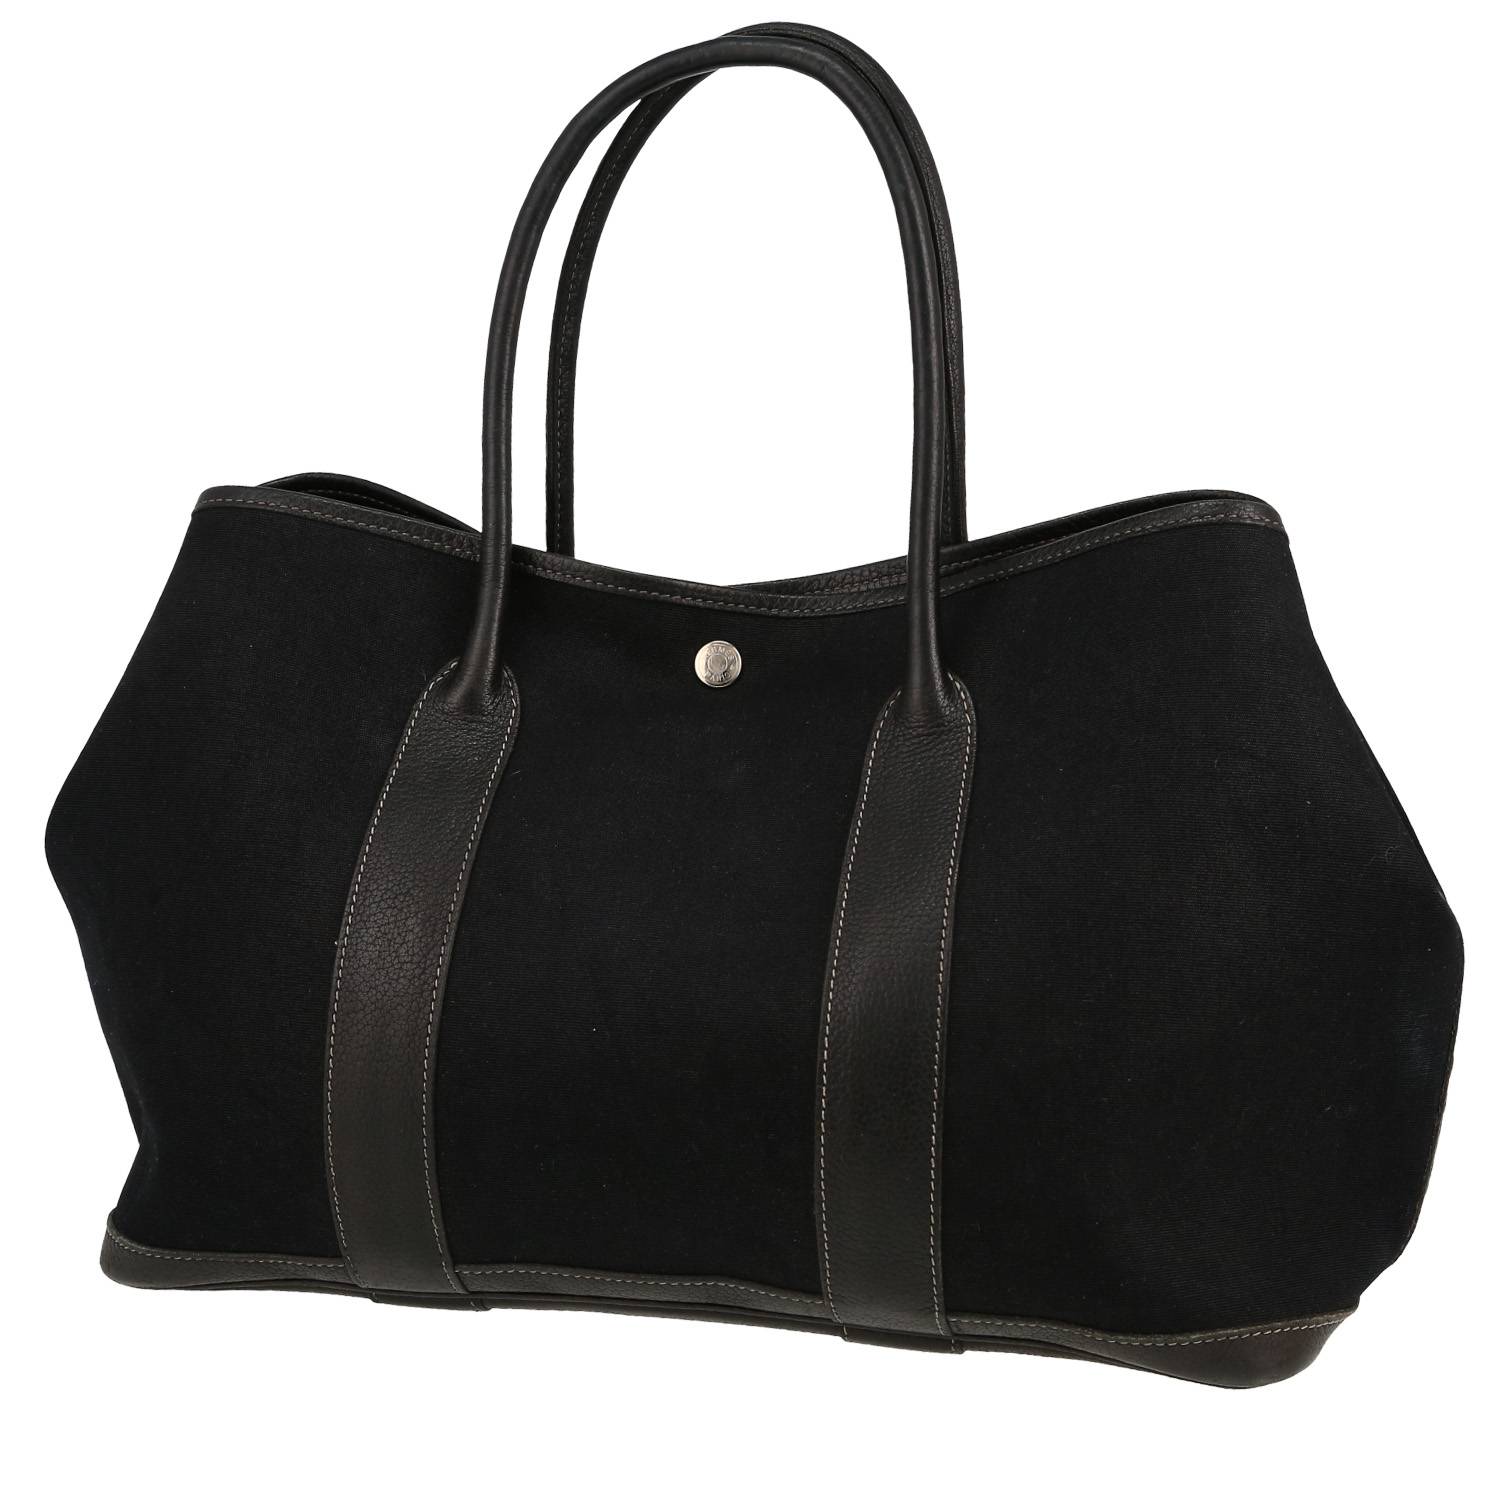 Garden Shopping Bag In Black Canvas And Black Leather